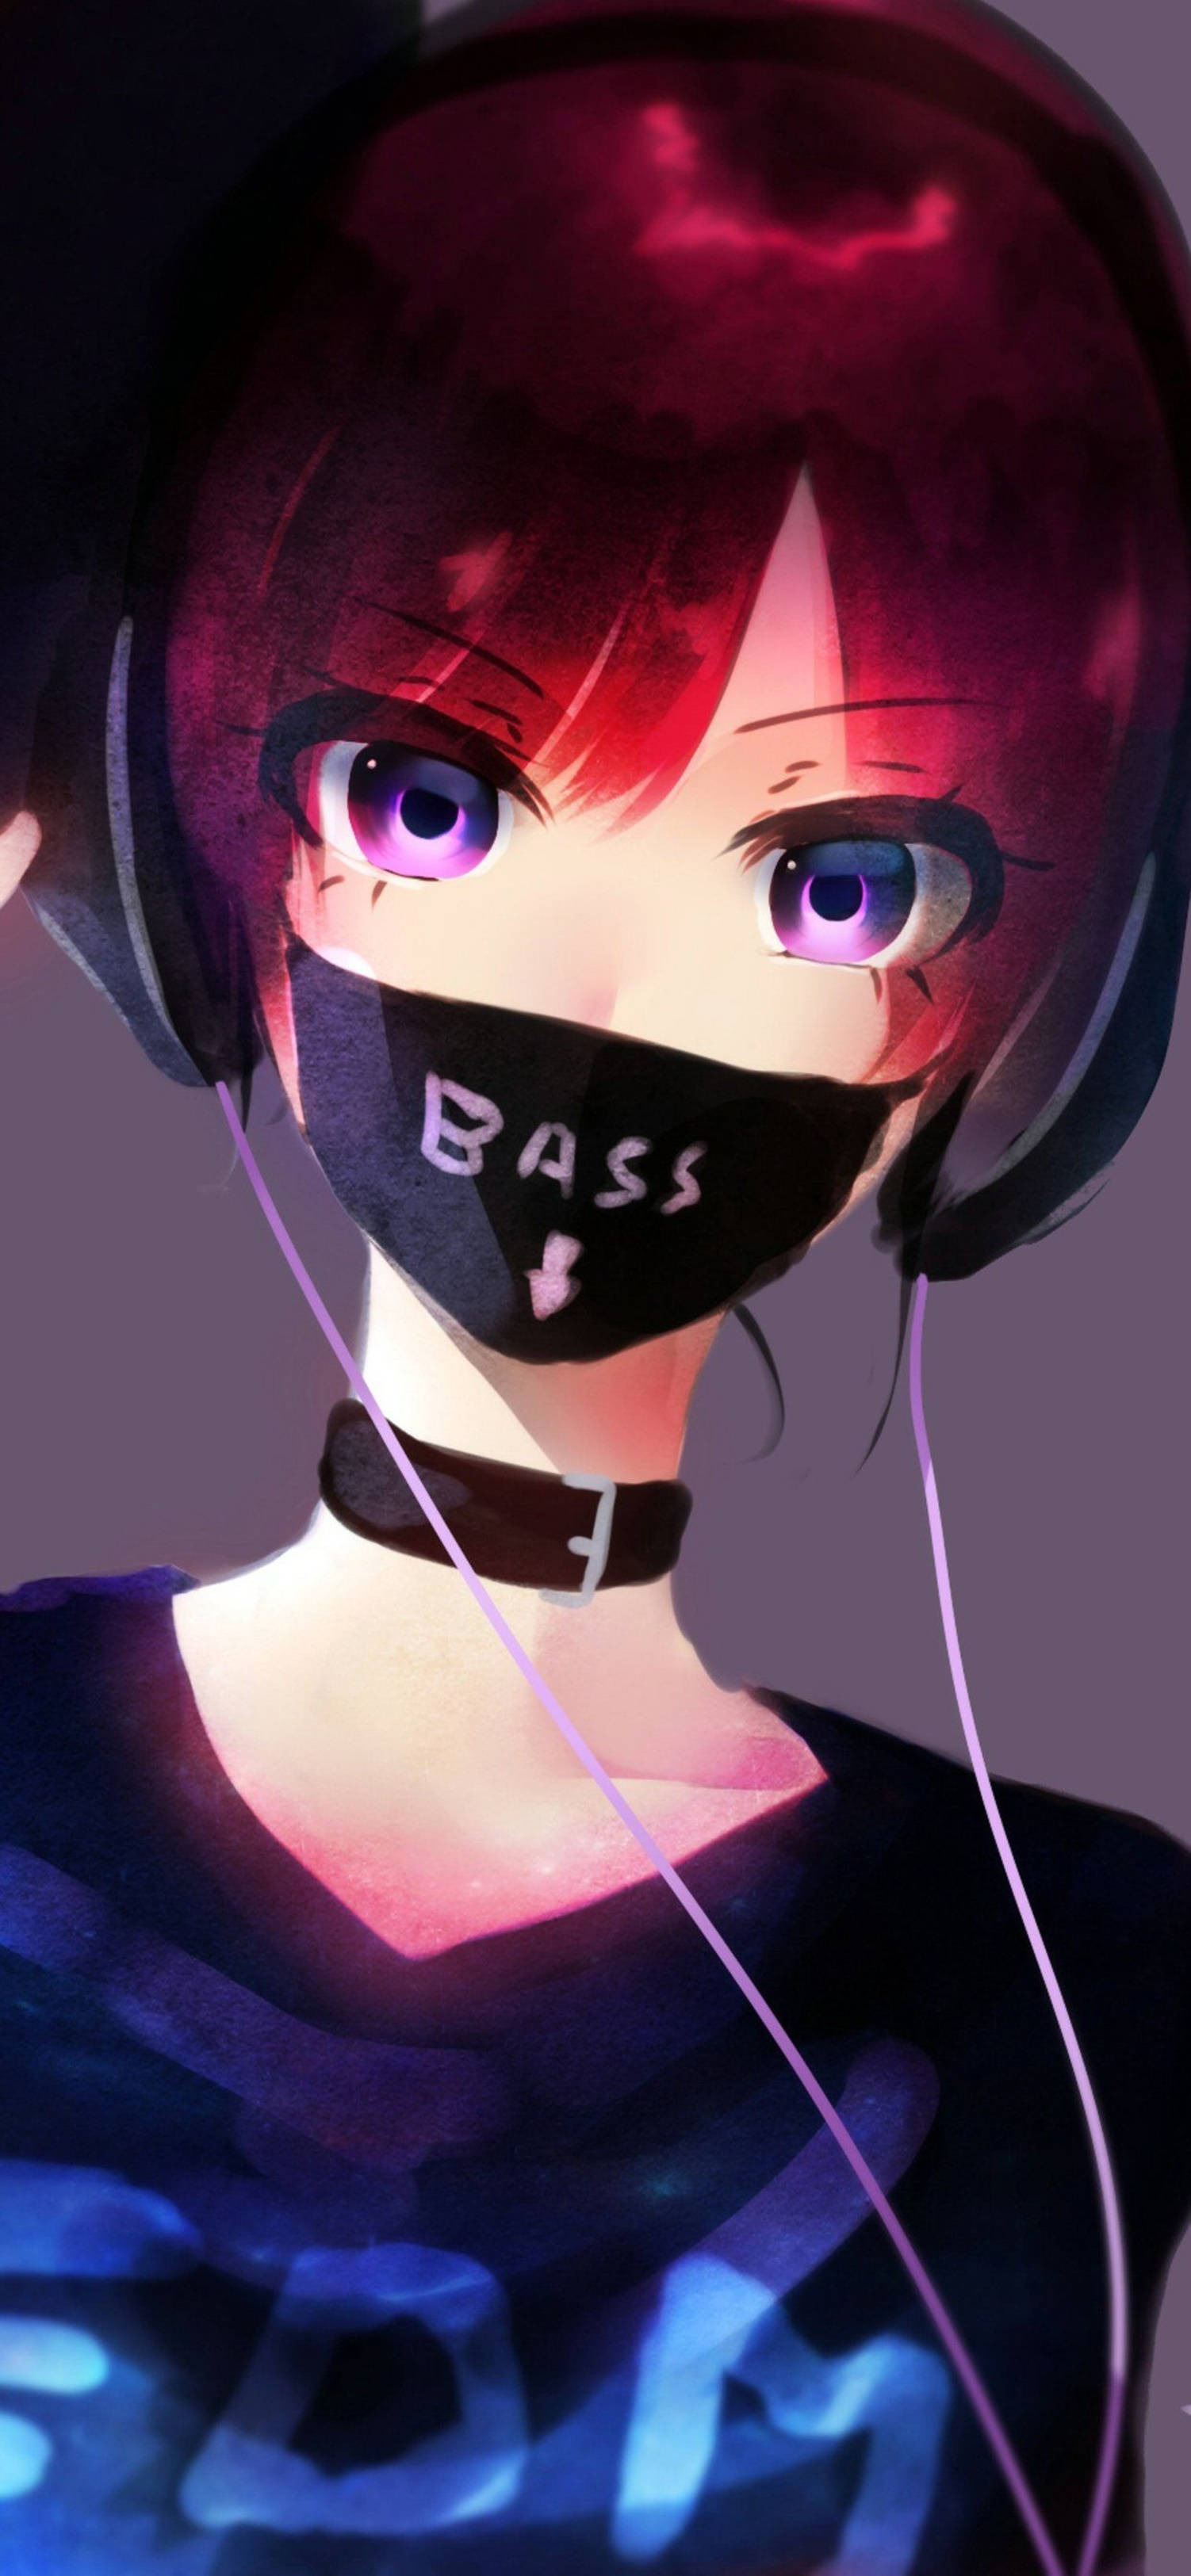 Mysterious Anime Girl In Black Mask - 4k Iphone Wallpaper Background